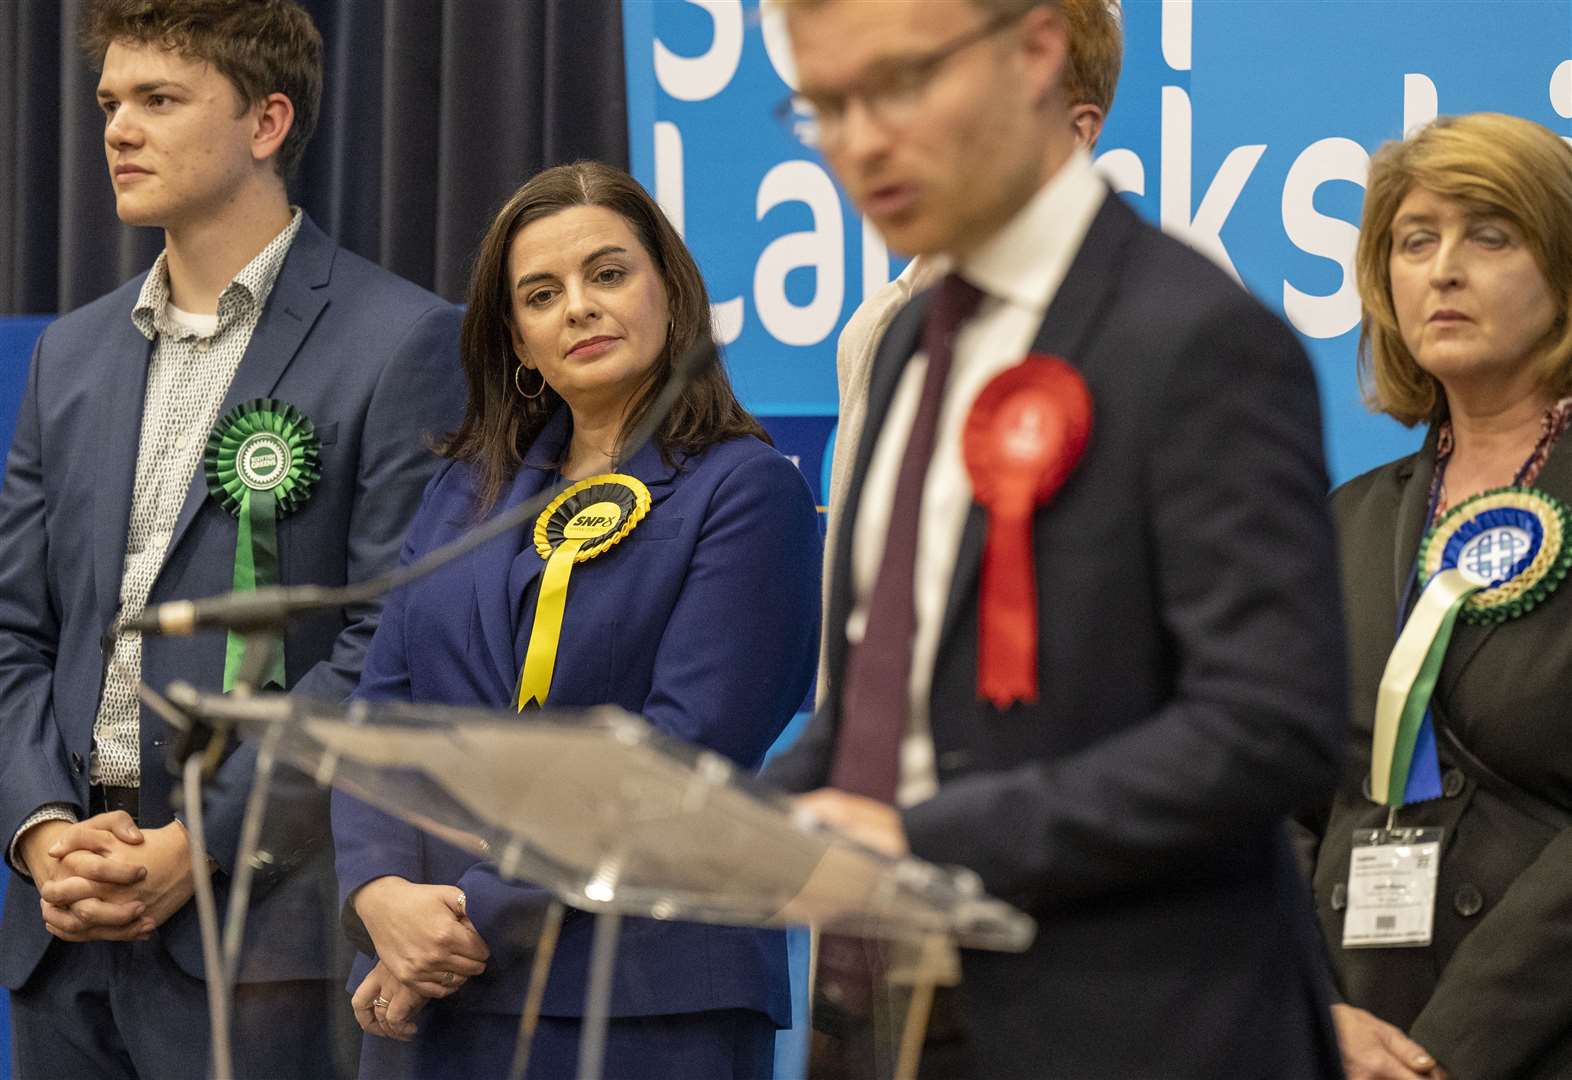 SNP candidate Katy Louden was defeated by Labour’s Michael Shanks in the Rutherglen and Hamilton West by-election (Jane Barlow/PA)